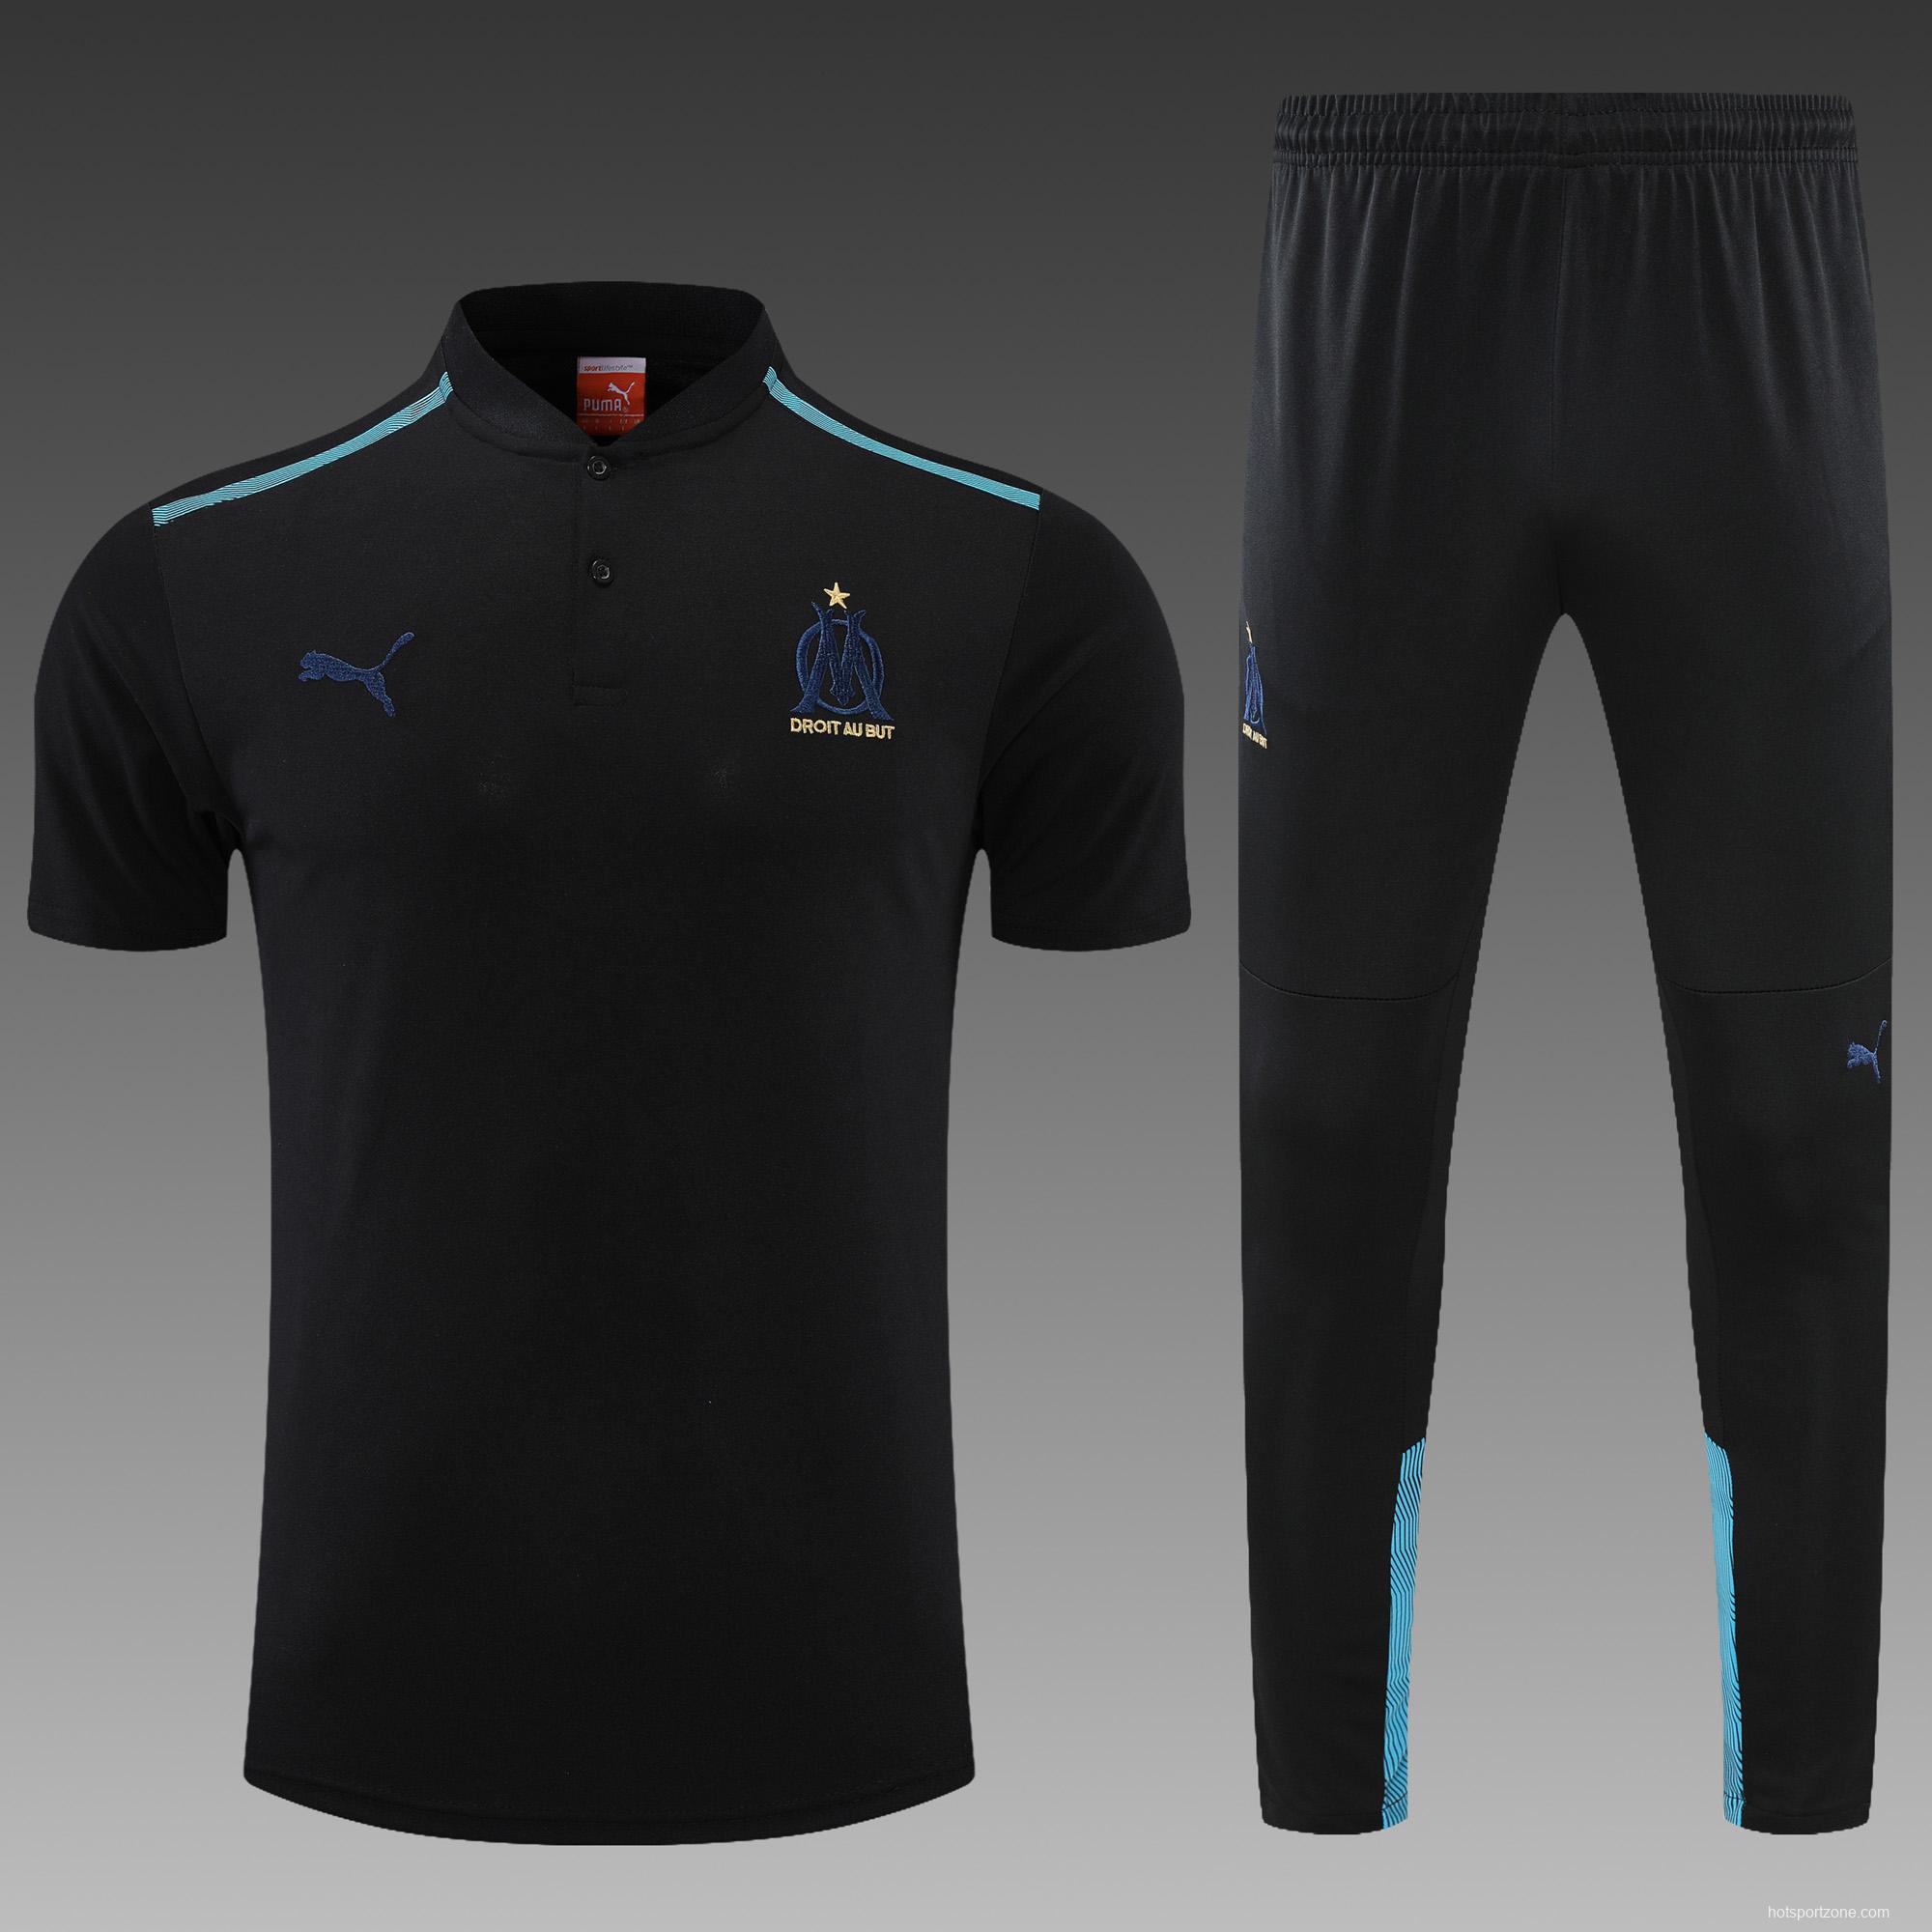 Olympique de MarseillePOLO kit Black (not supported to be sold separately)